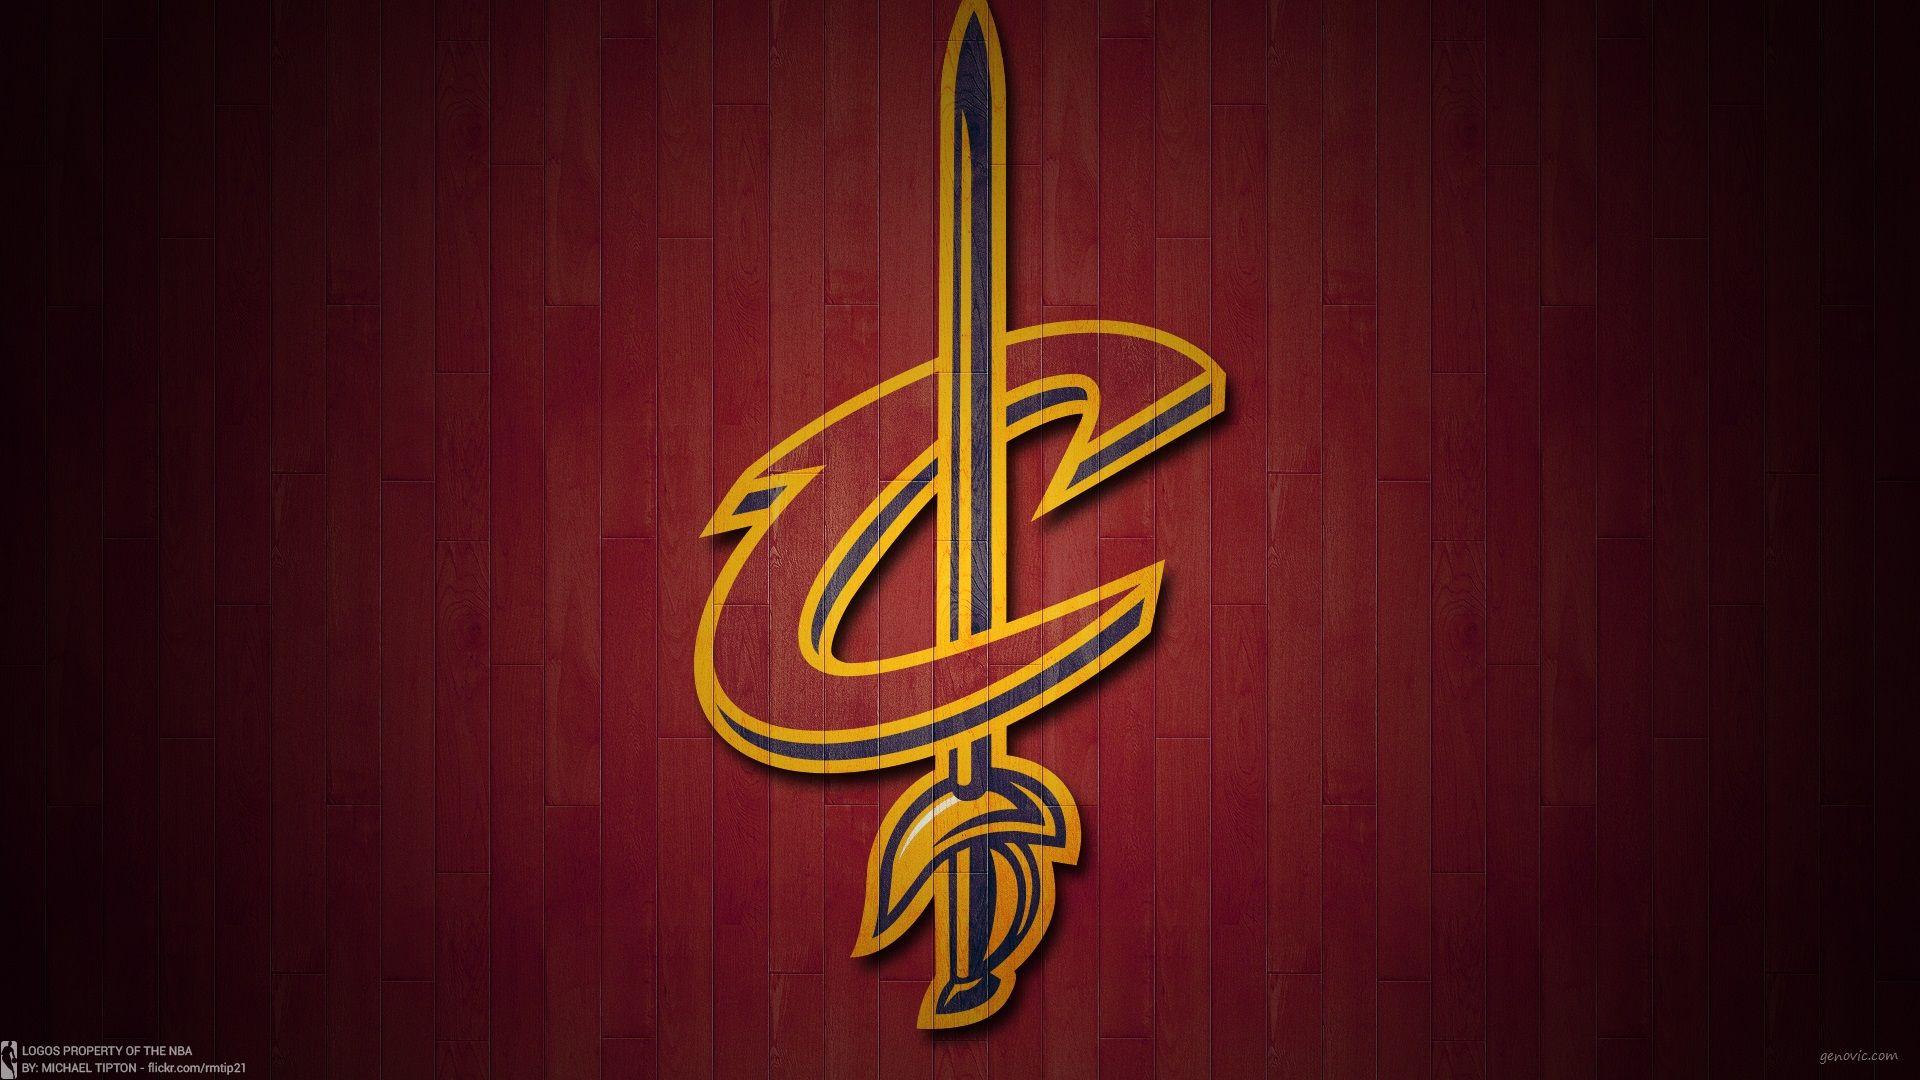 Cleveland Cavaliers Wallpapers - Top